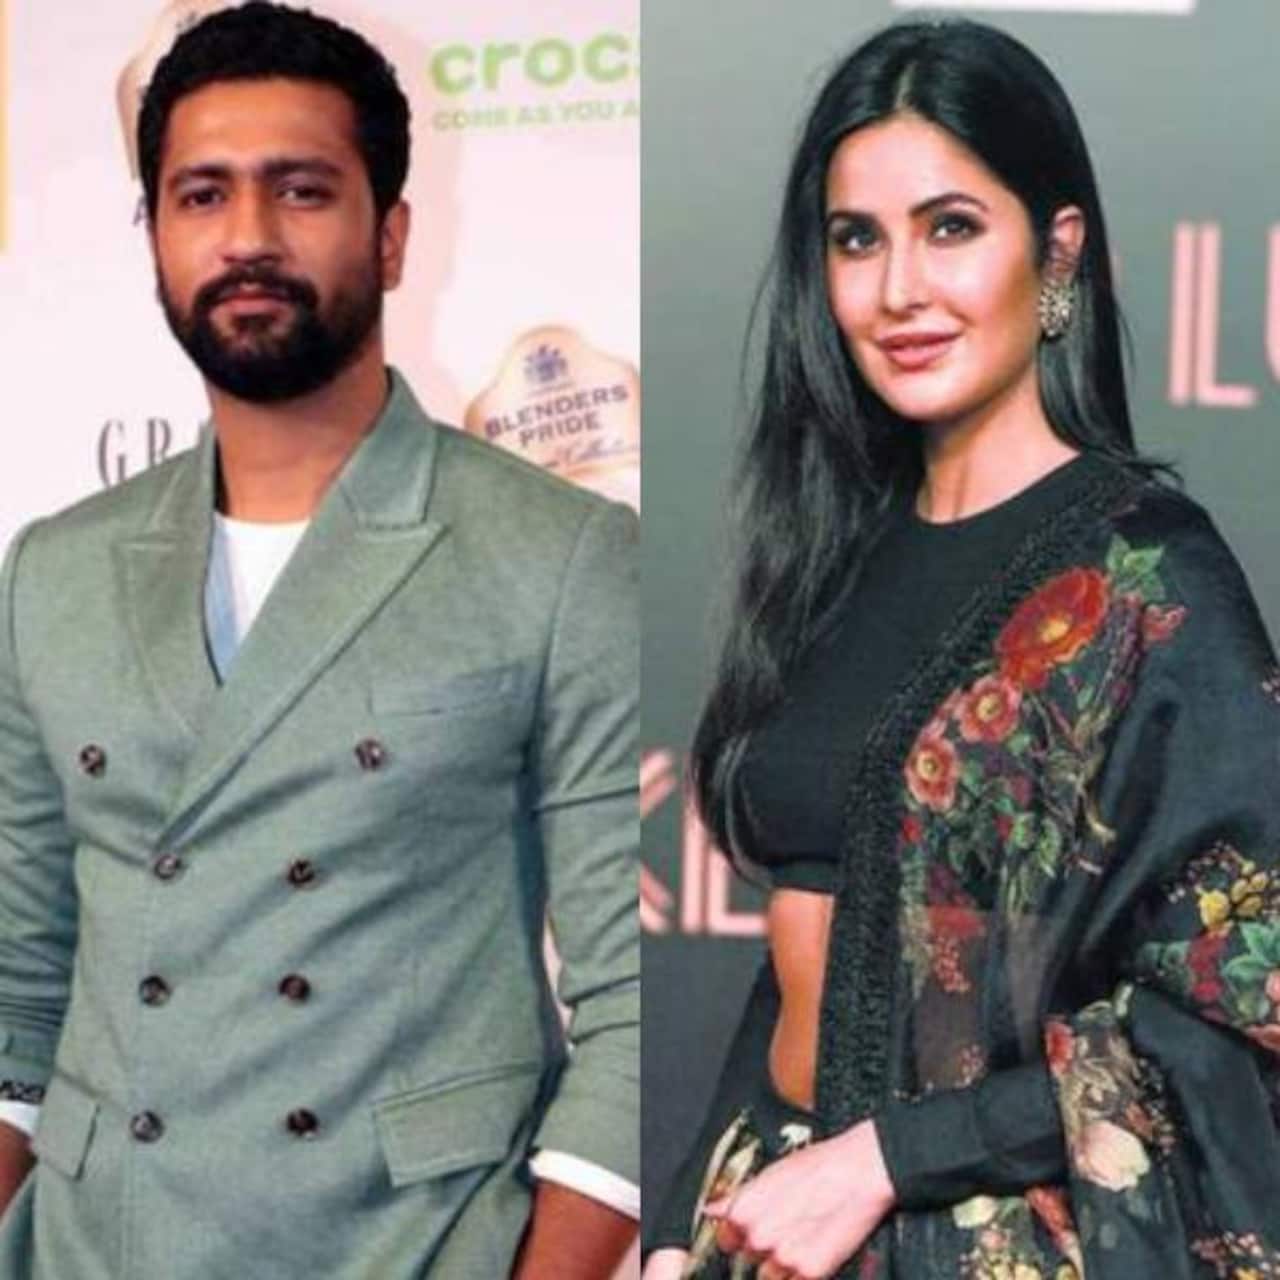 Vicky Kaushal-Katrina Kaif wedding: Guests to gain entry via a SPECIAL code and not their real names? Here's what we know